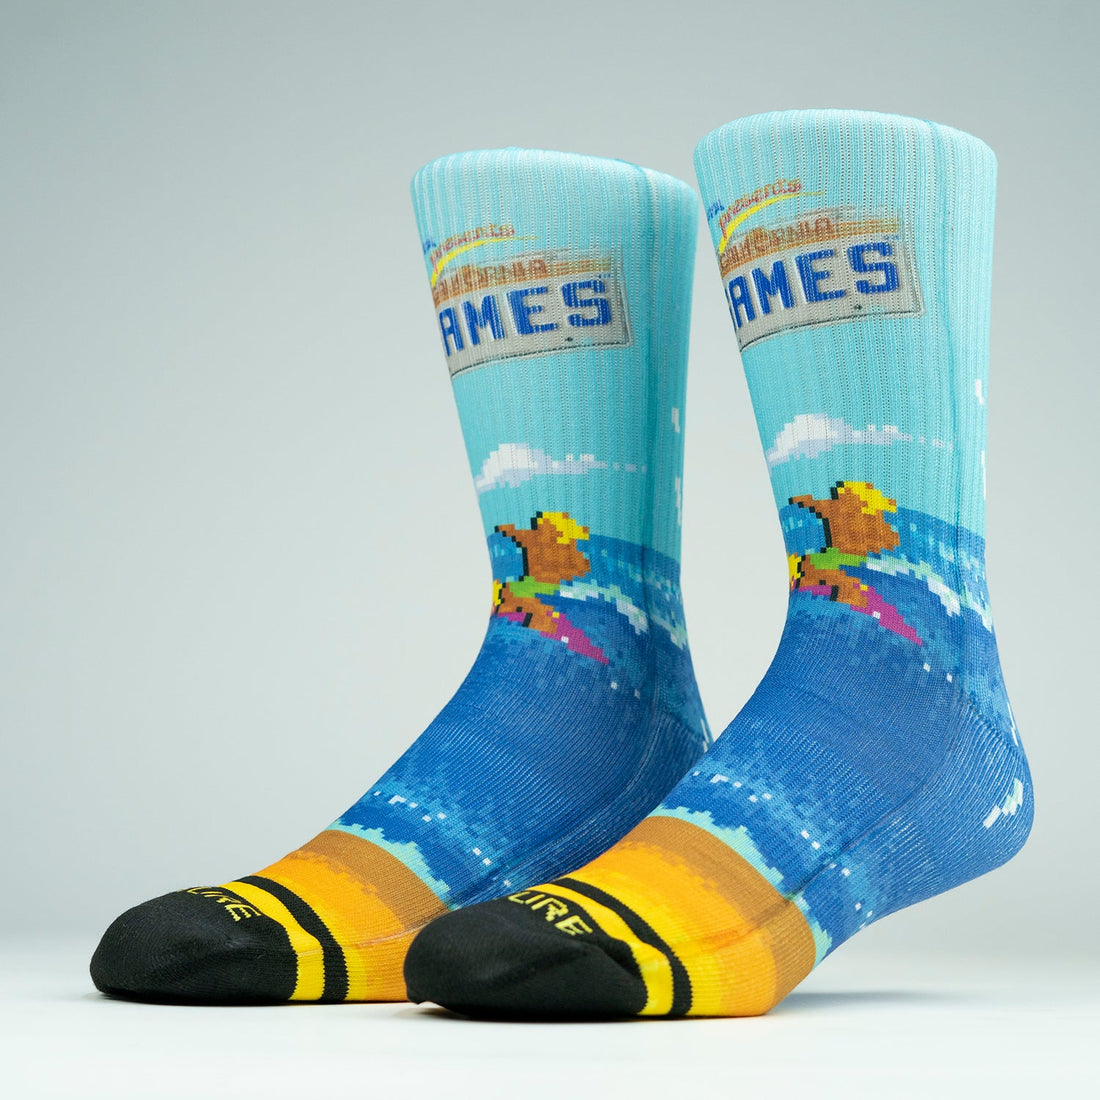 KEEP YOUR TOES WARM THIS CHRISTMAS. LIMITED EDITION SOCKS. SOCK IT TO EM'!